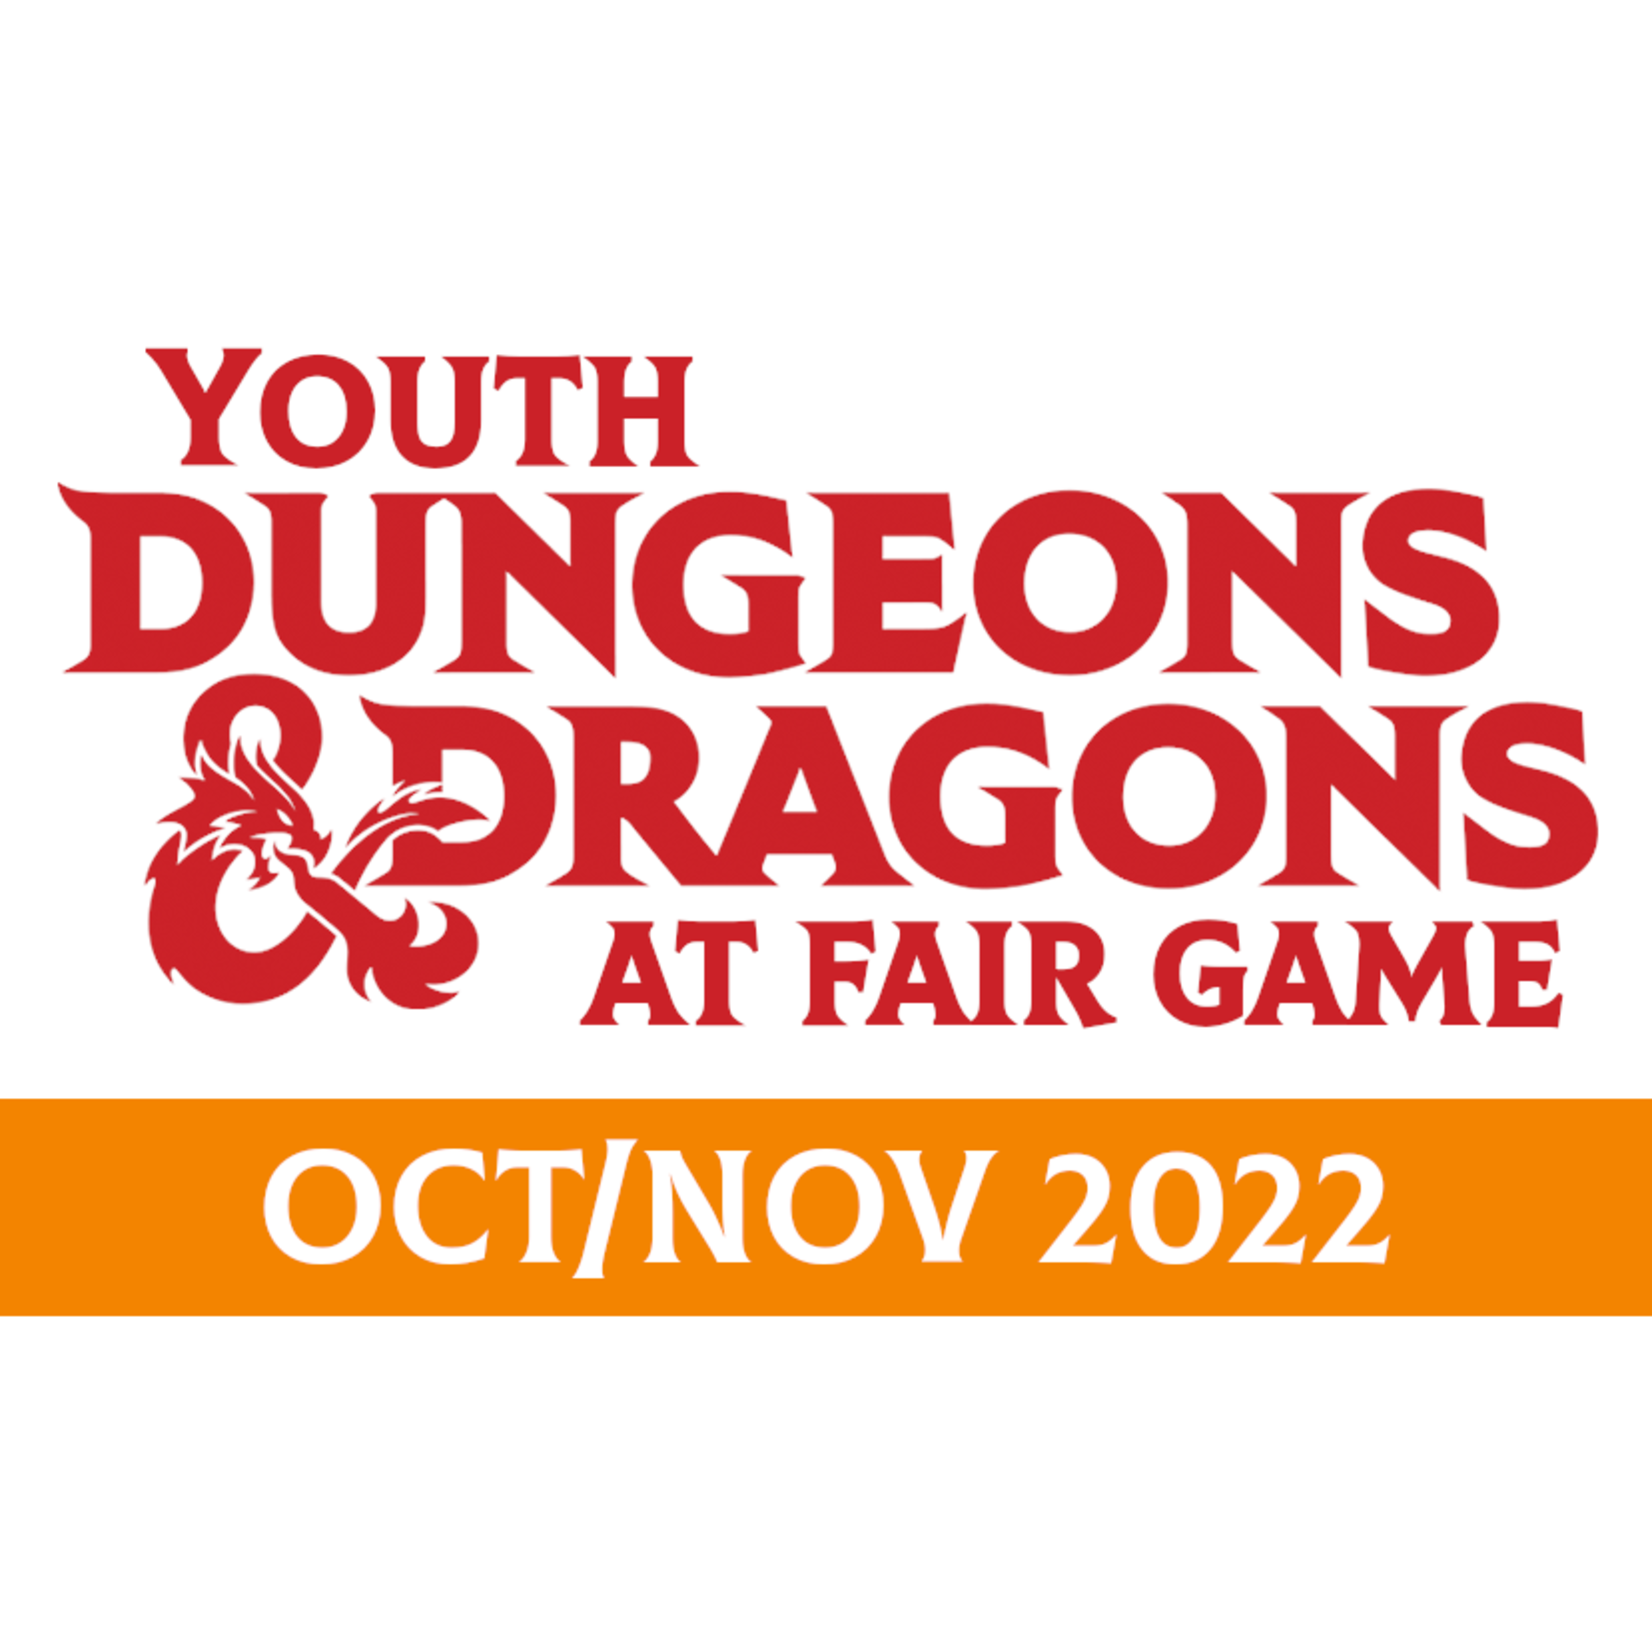 Fair Game YDND Oct/Nov 2022: Group DG - Friday Downers Grove 4:30-6:30 PM (Ages 10-15)